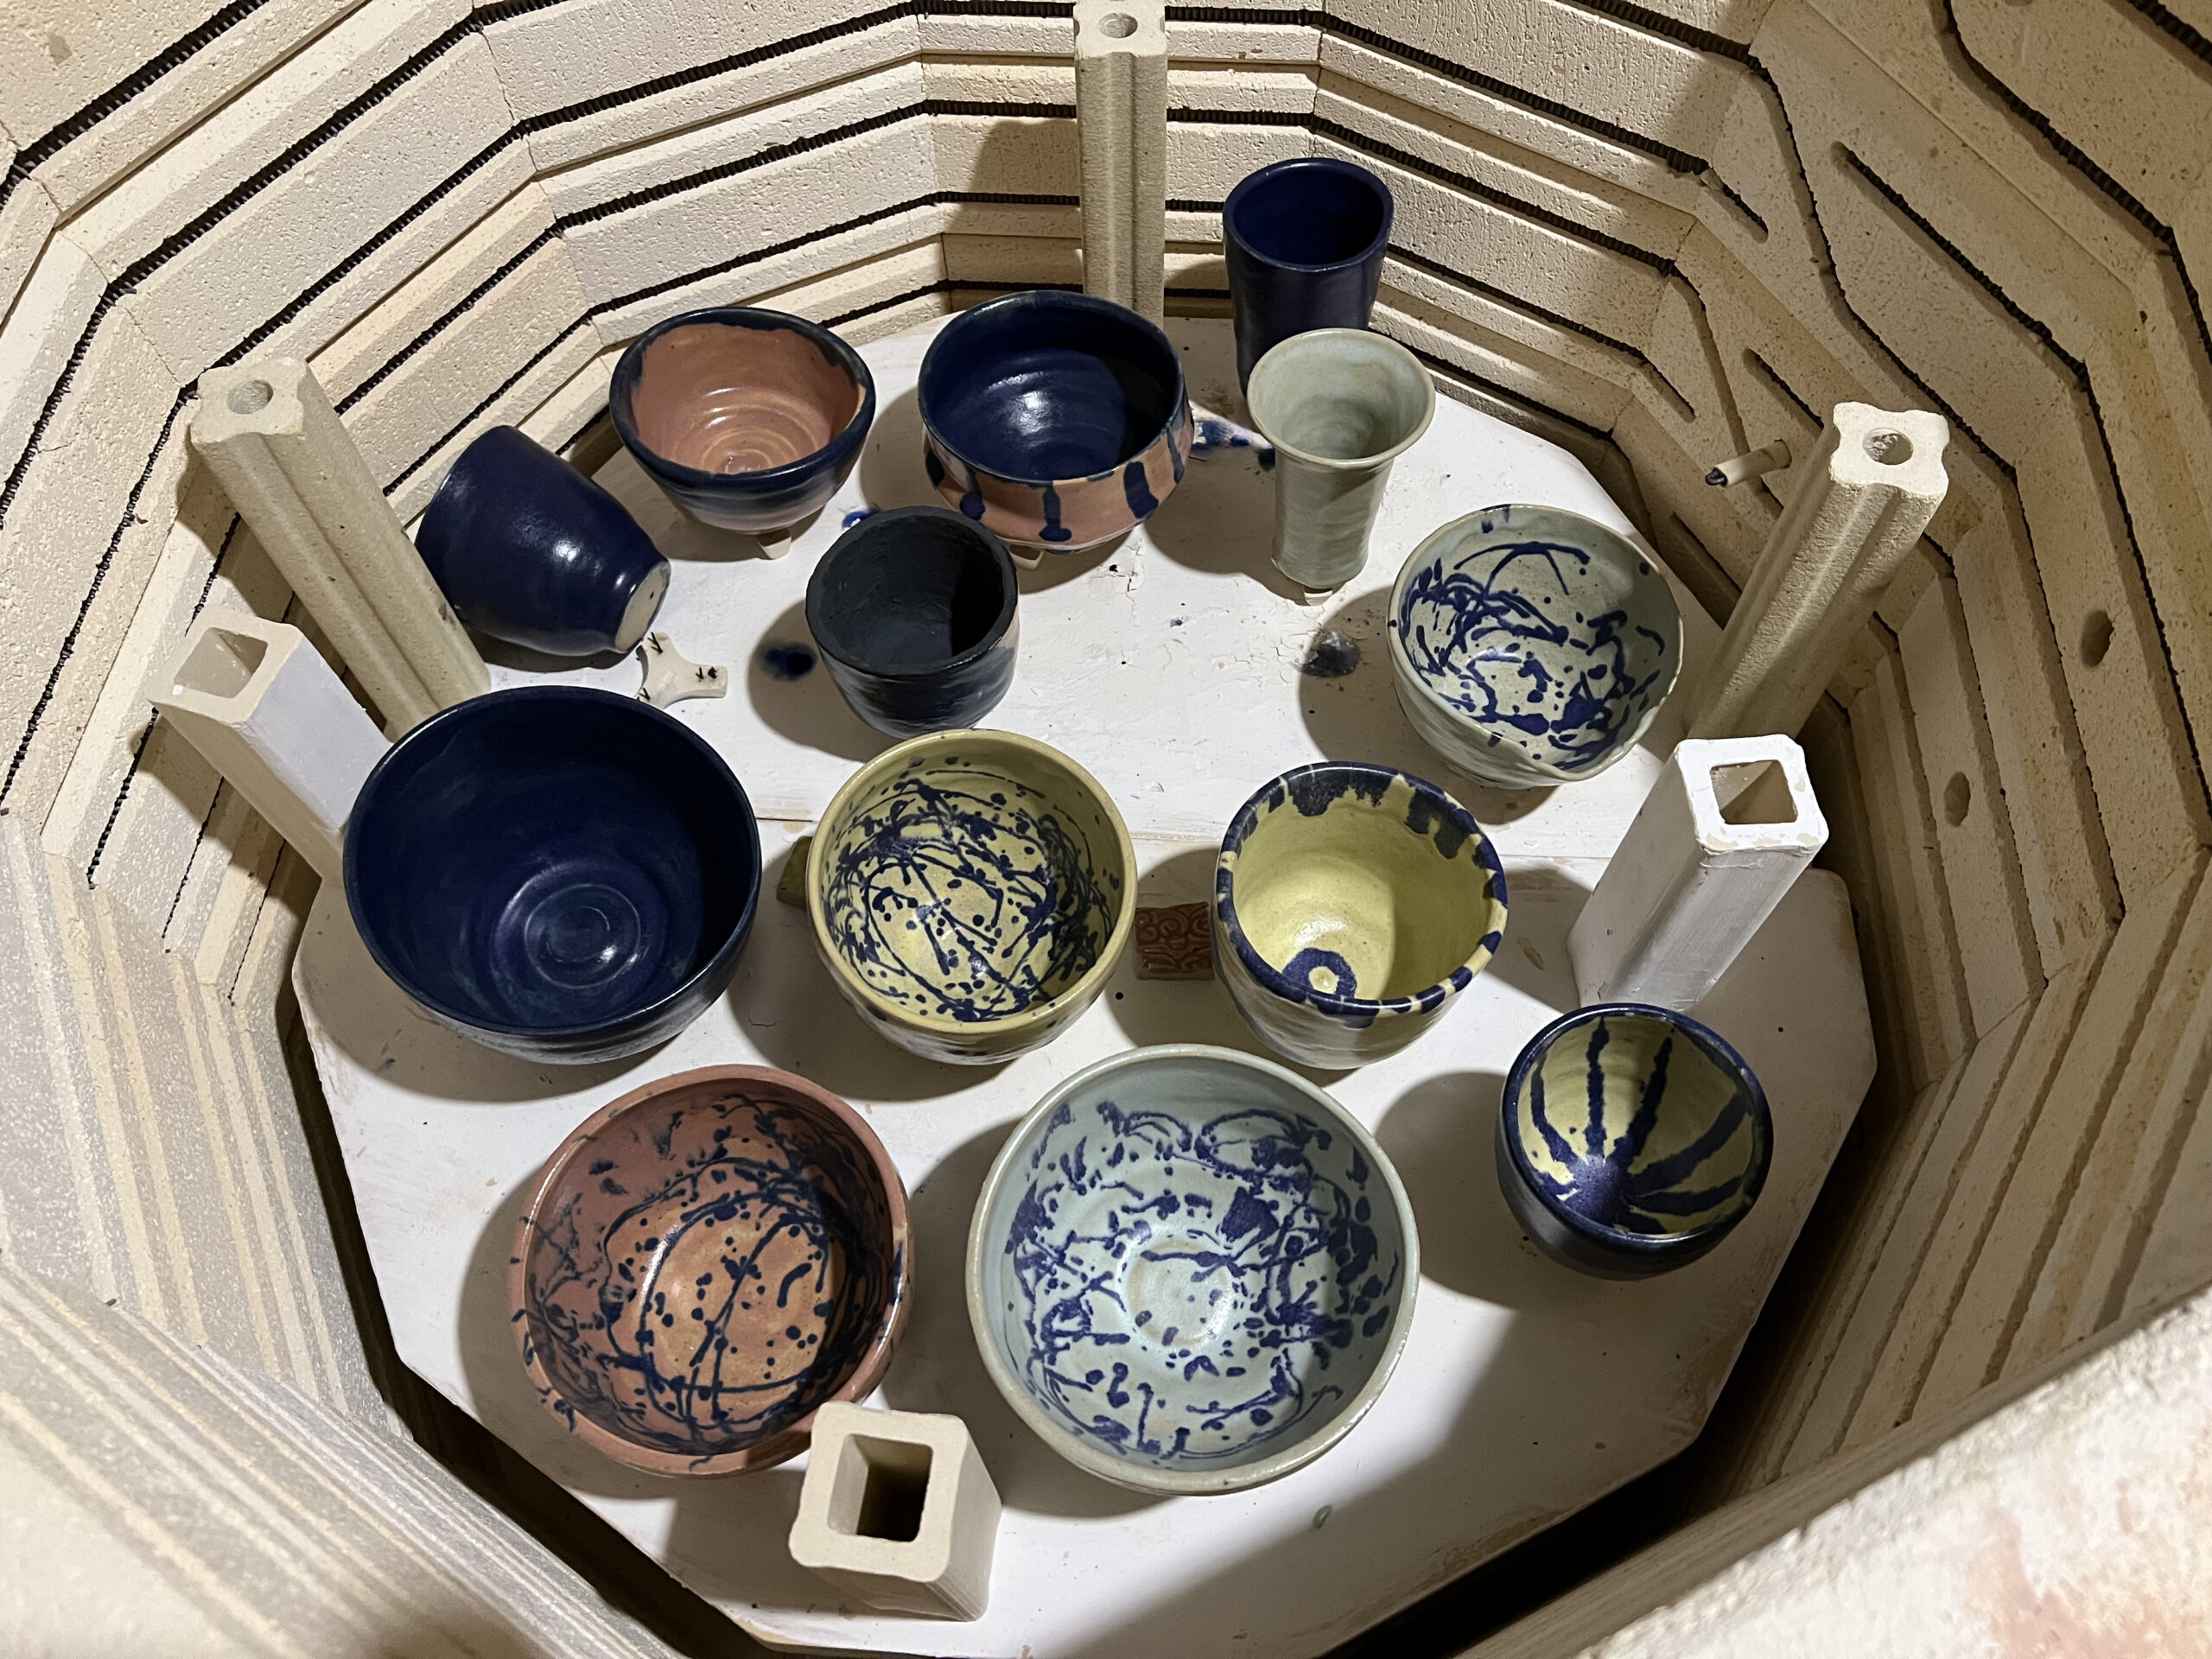 a basket filled with ceramic bowls of varied shapes and sizes